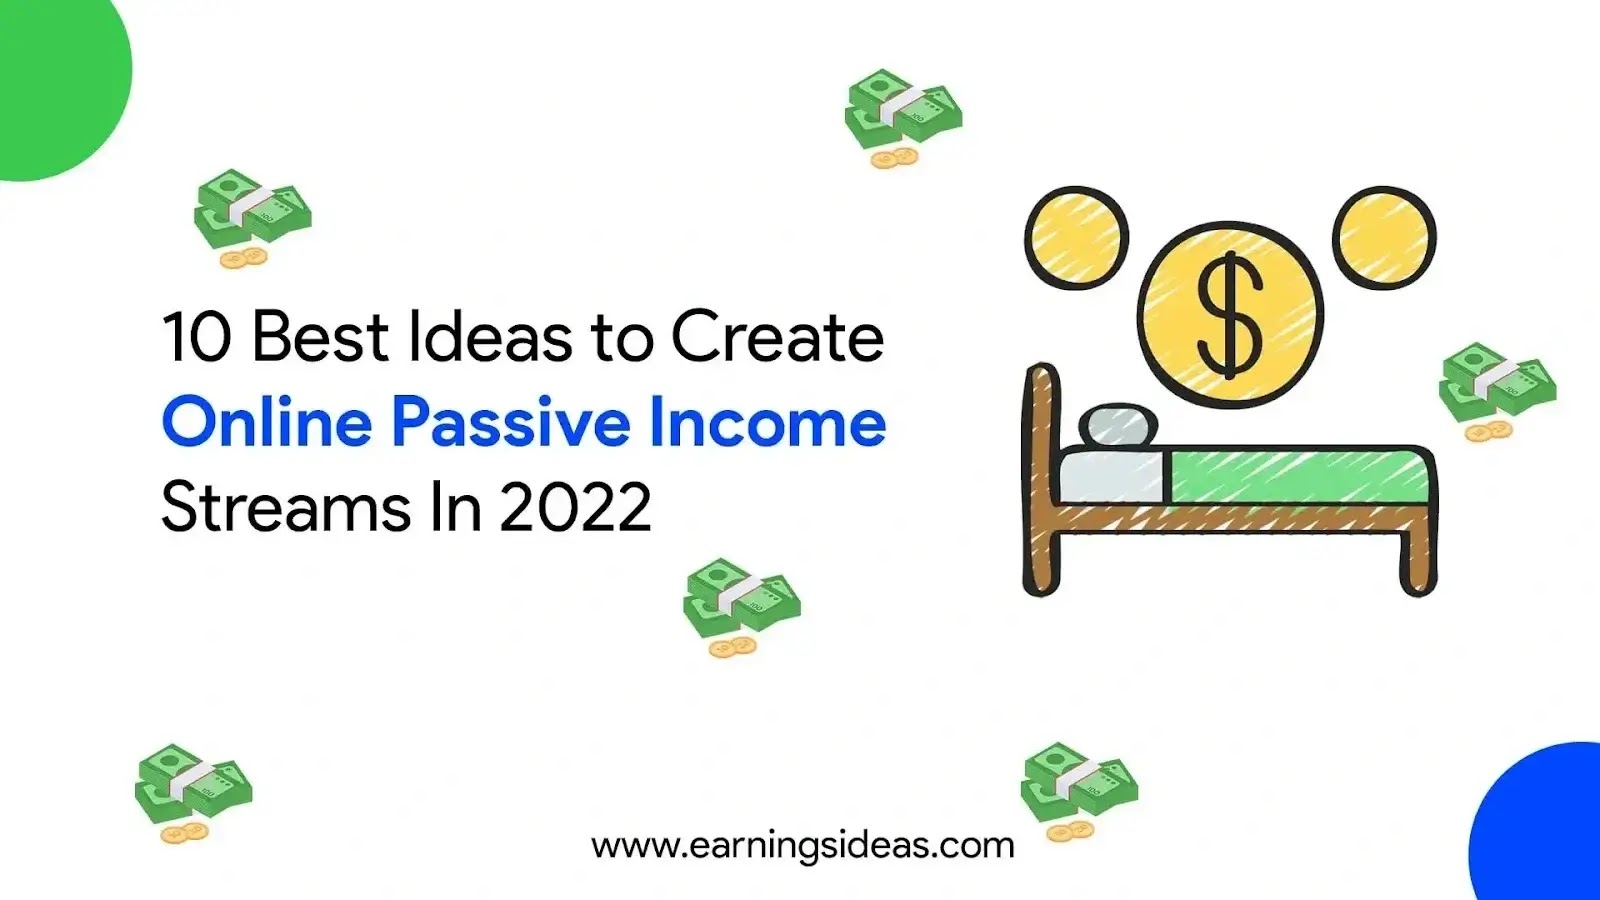 10 Best Ideas to Create Online Passive Income Streams In 2022